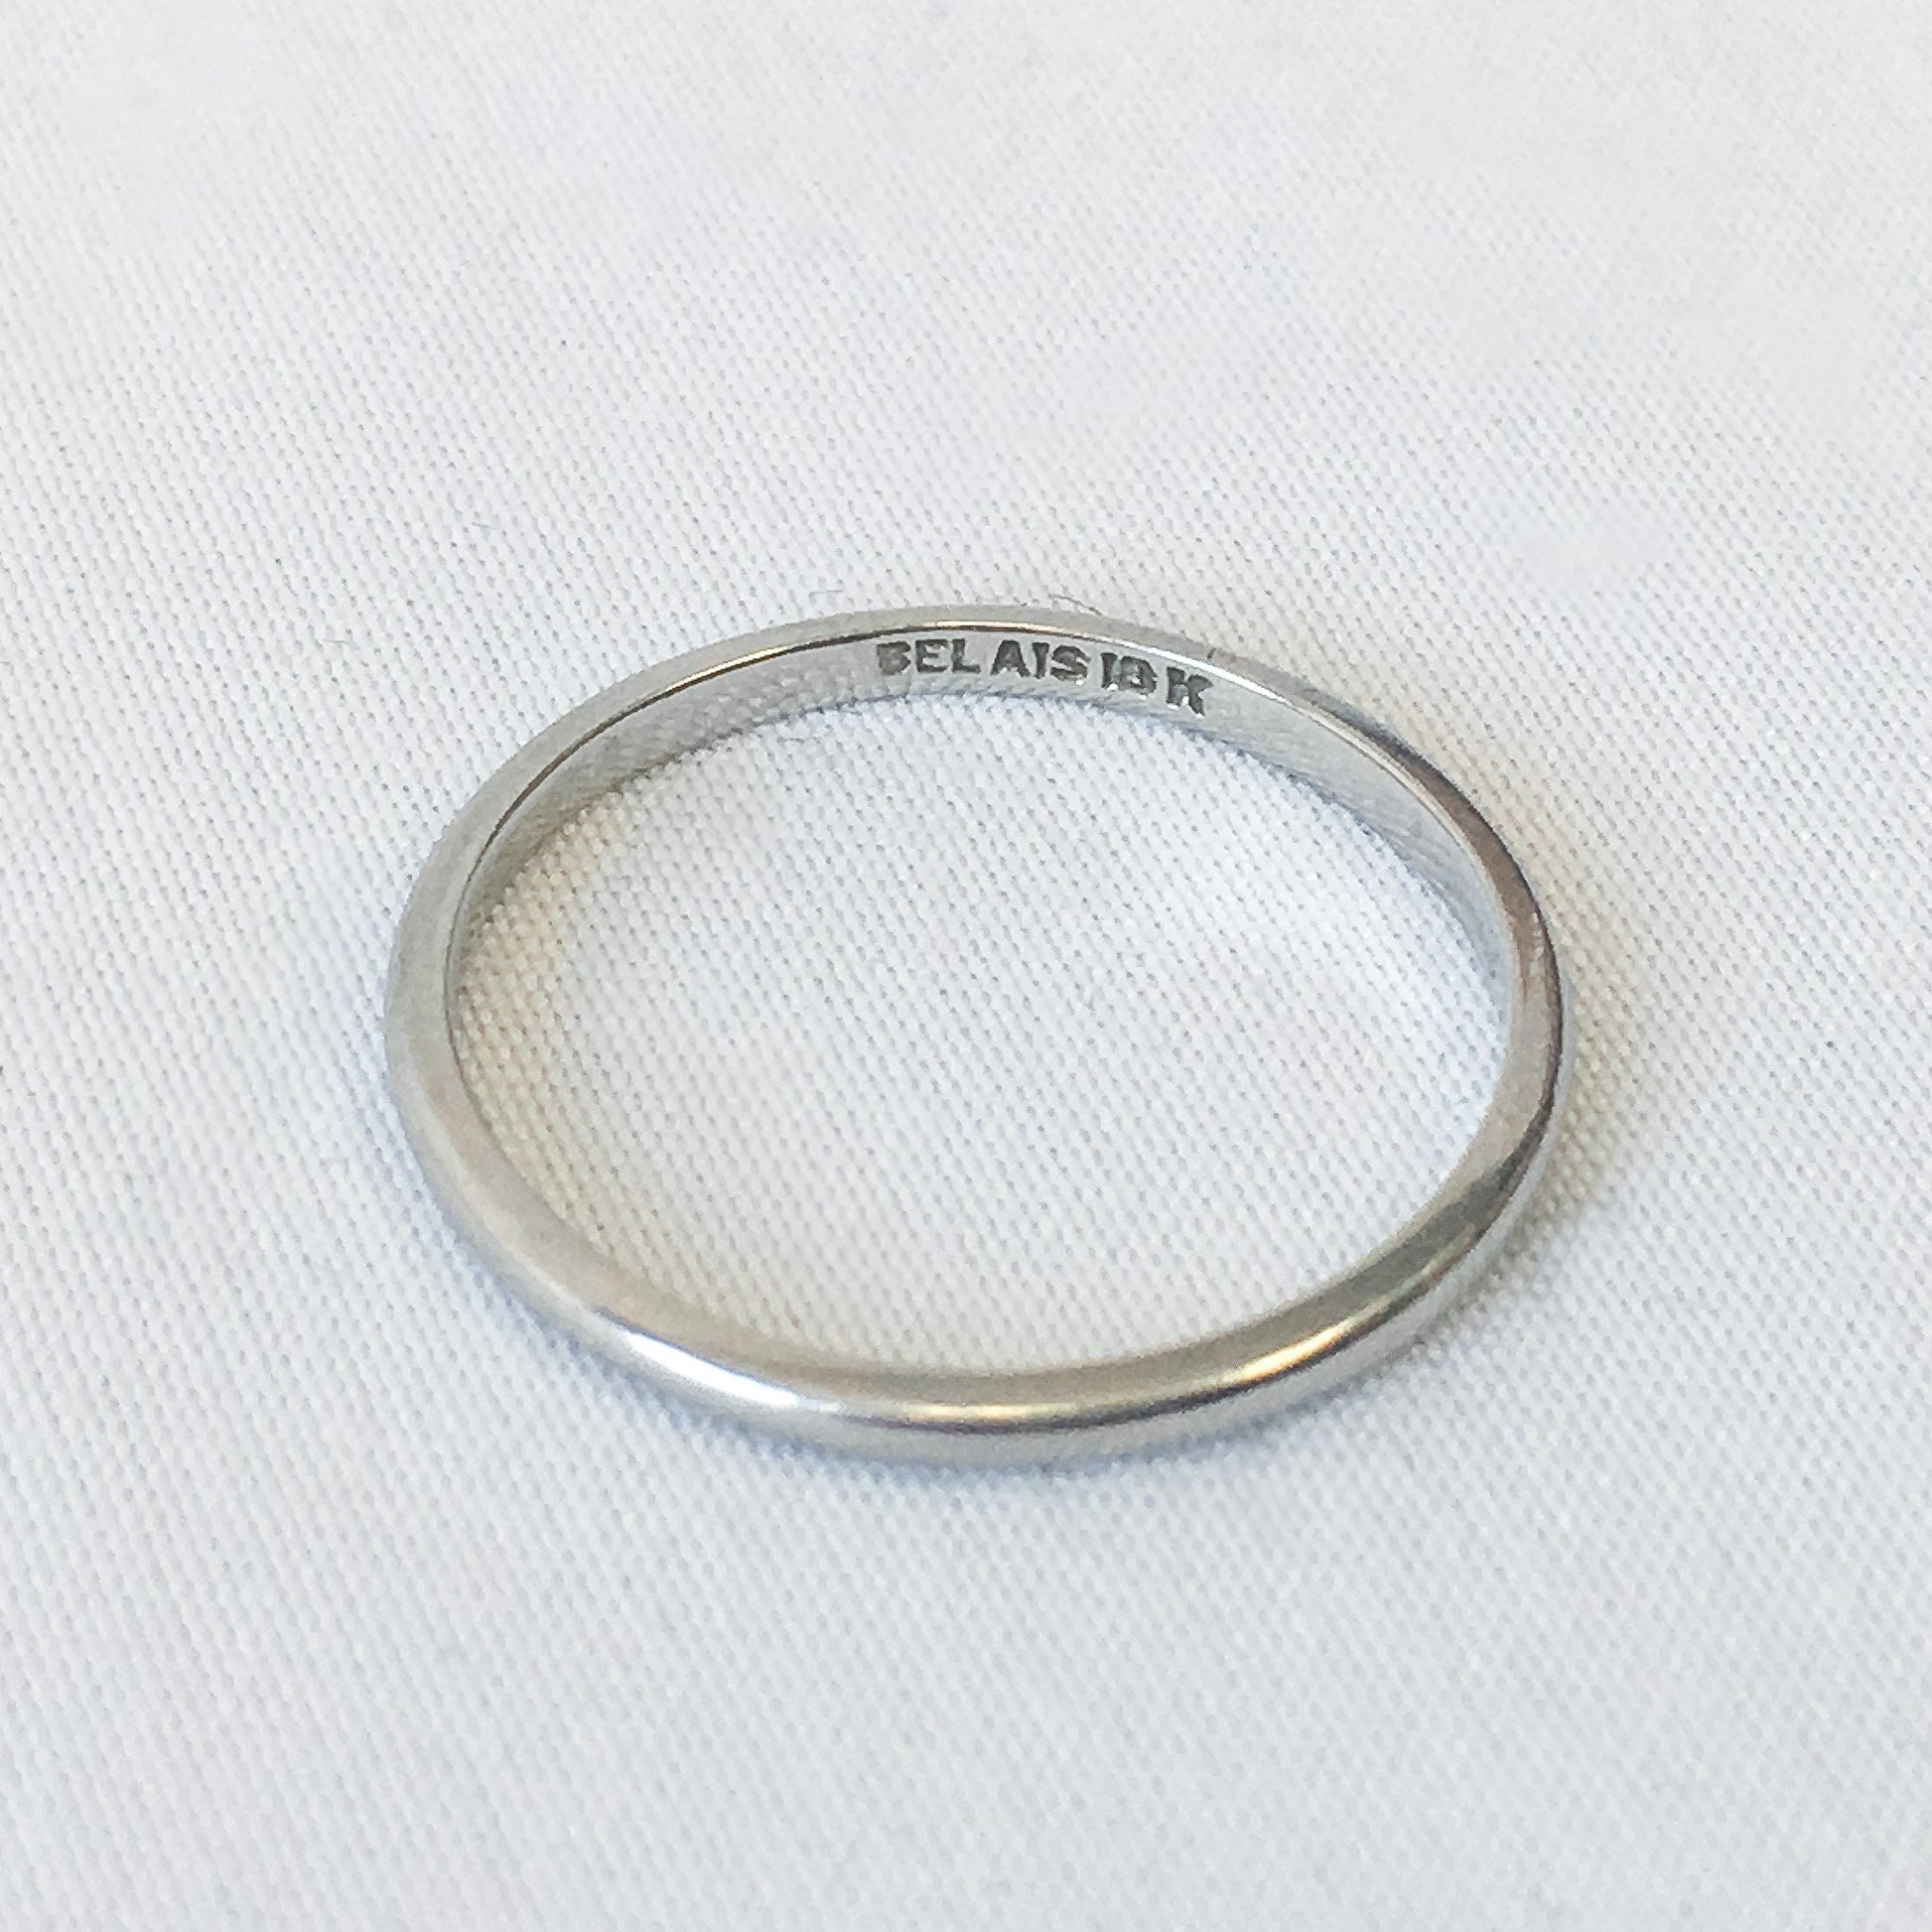 Vintage BELAIS Textured 18k White Gold Band, Size 6.5, Simple Stackable Ring